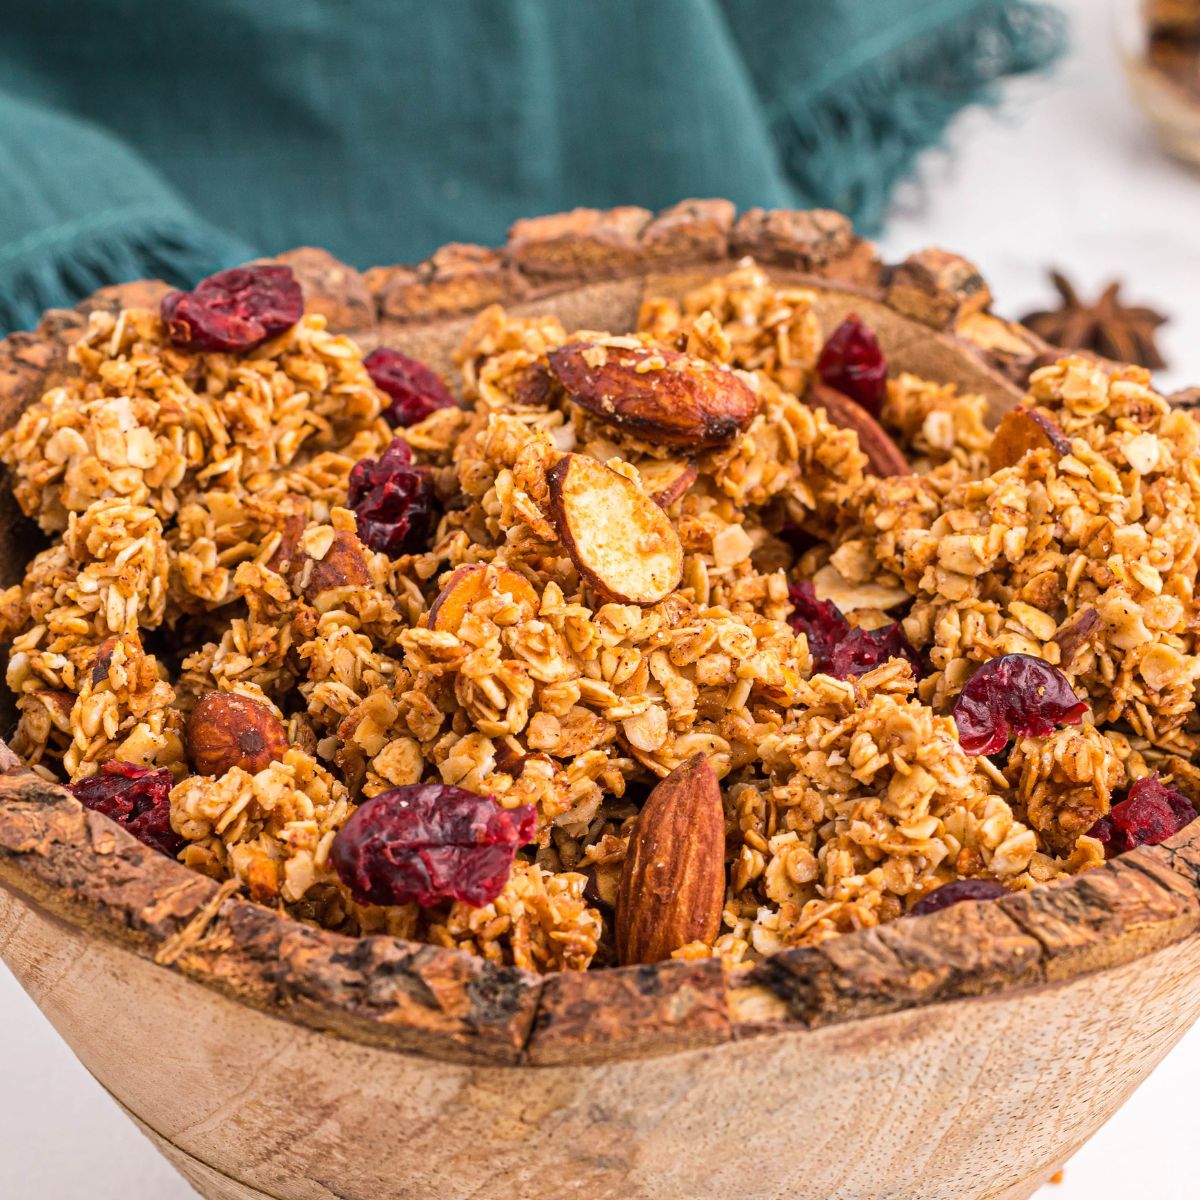 Golden granola in a wooden bowl filled with nuts and dried fruit.